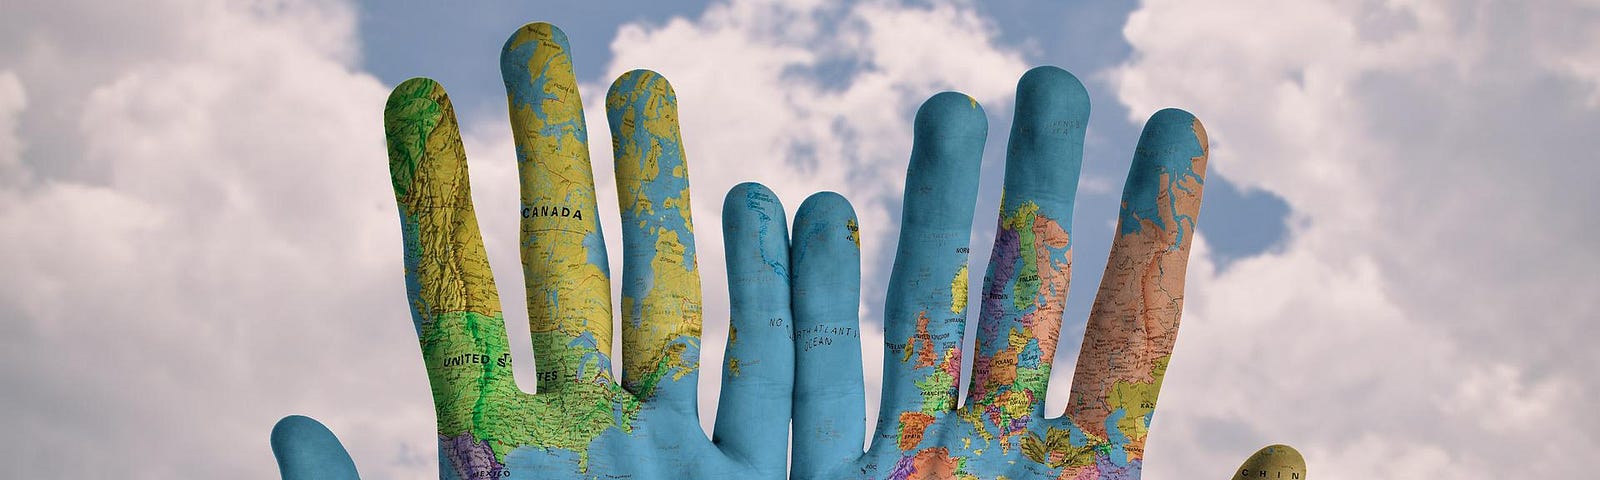 2 hands painted with a world map in color.